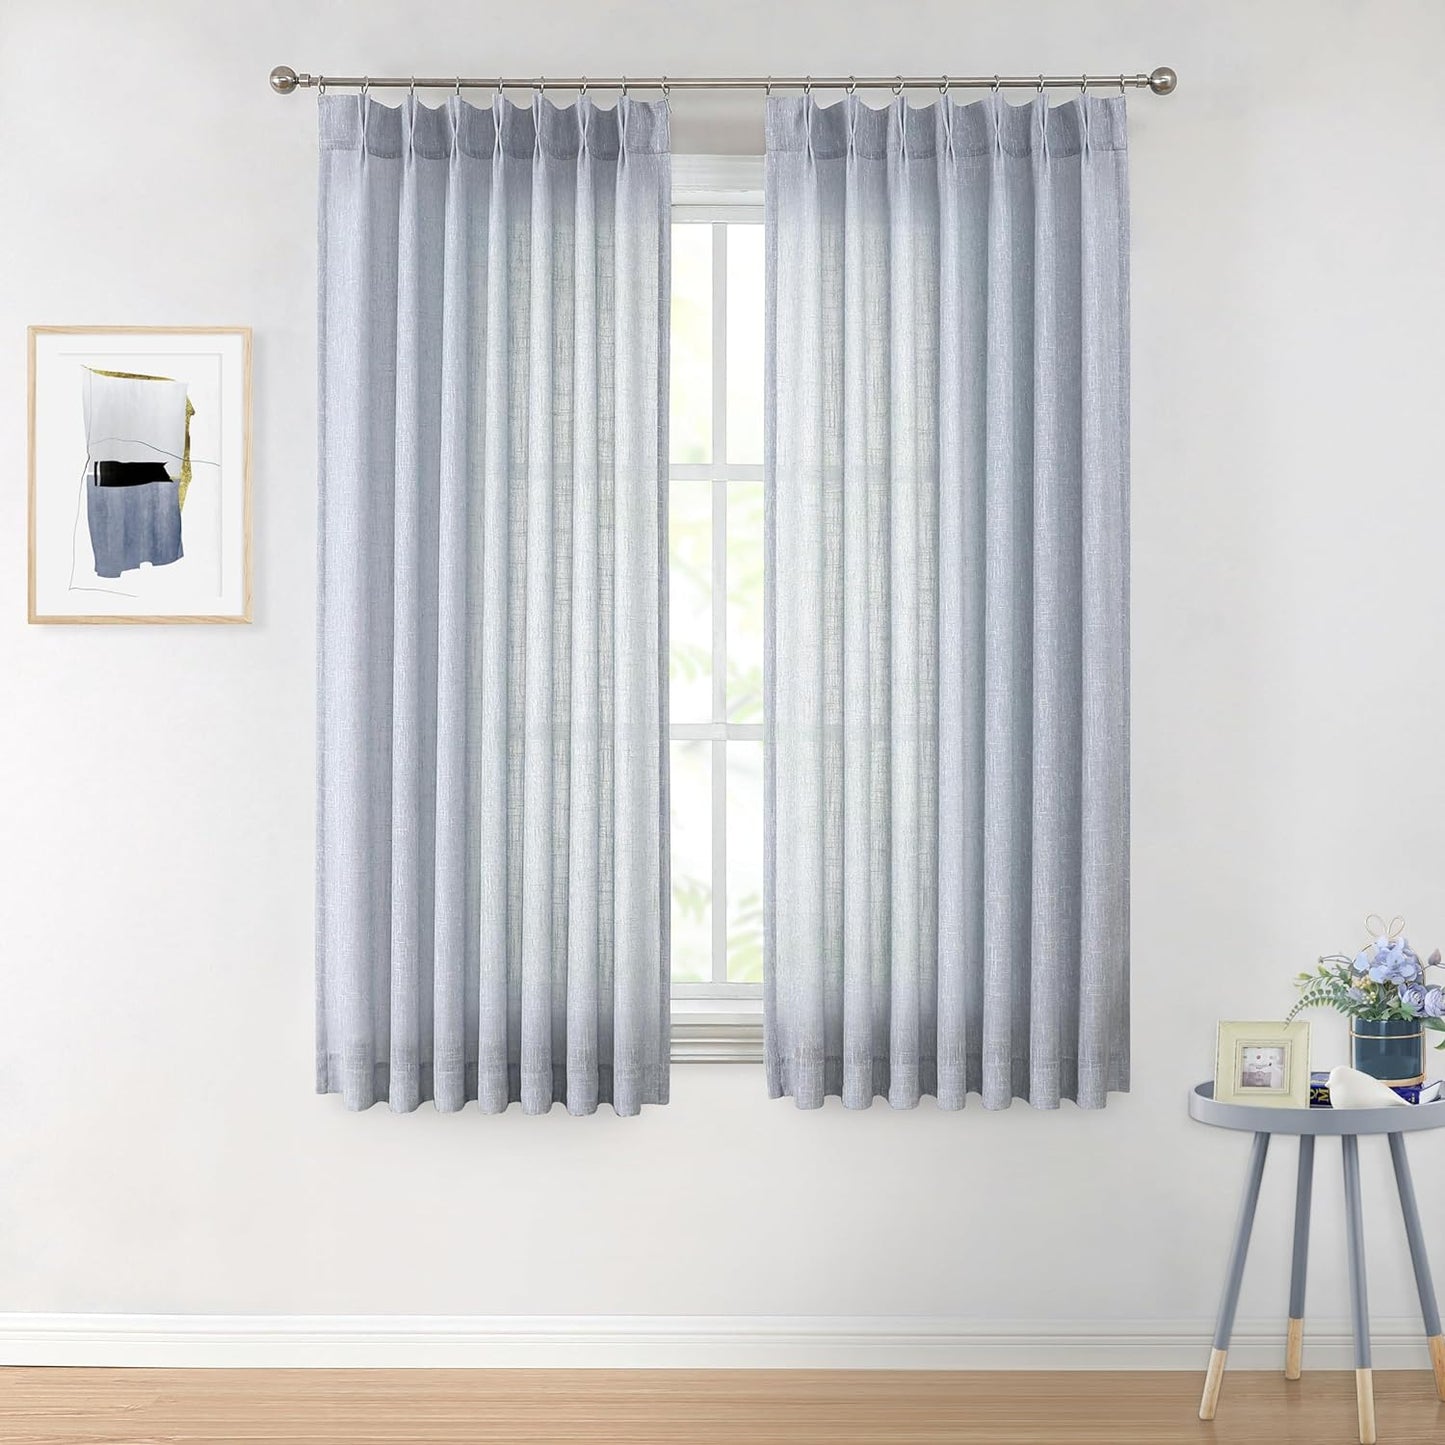 Vision Home Natural Pinch Pleated Semi Sheer Curtains Textured Linen Blended Light Filtering Window Curtains 84 Inch for Living Room Bedroom Pinch Pleat Drapes with Hooks 2 Panels 42" Wx84 L  Vision Home Chambray Blue/Pinch 40"X72"X2 